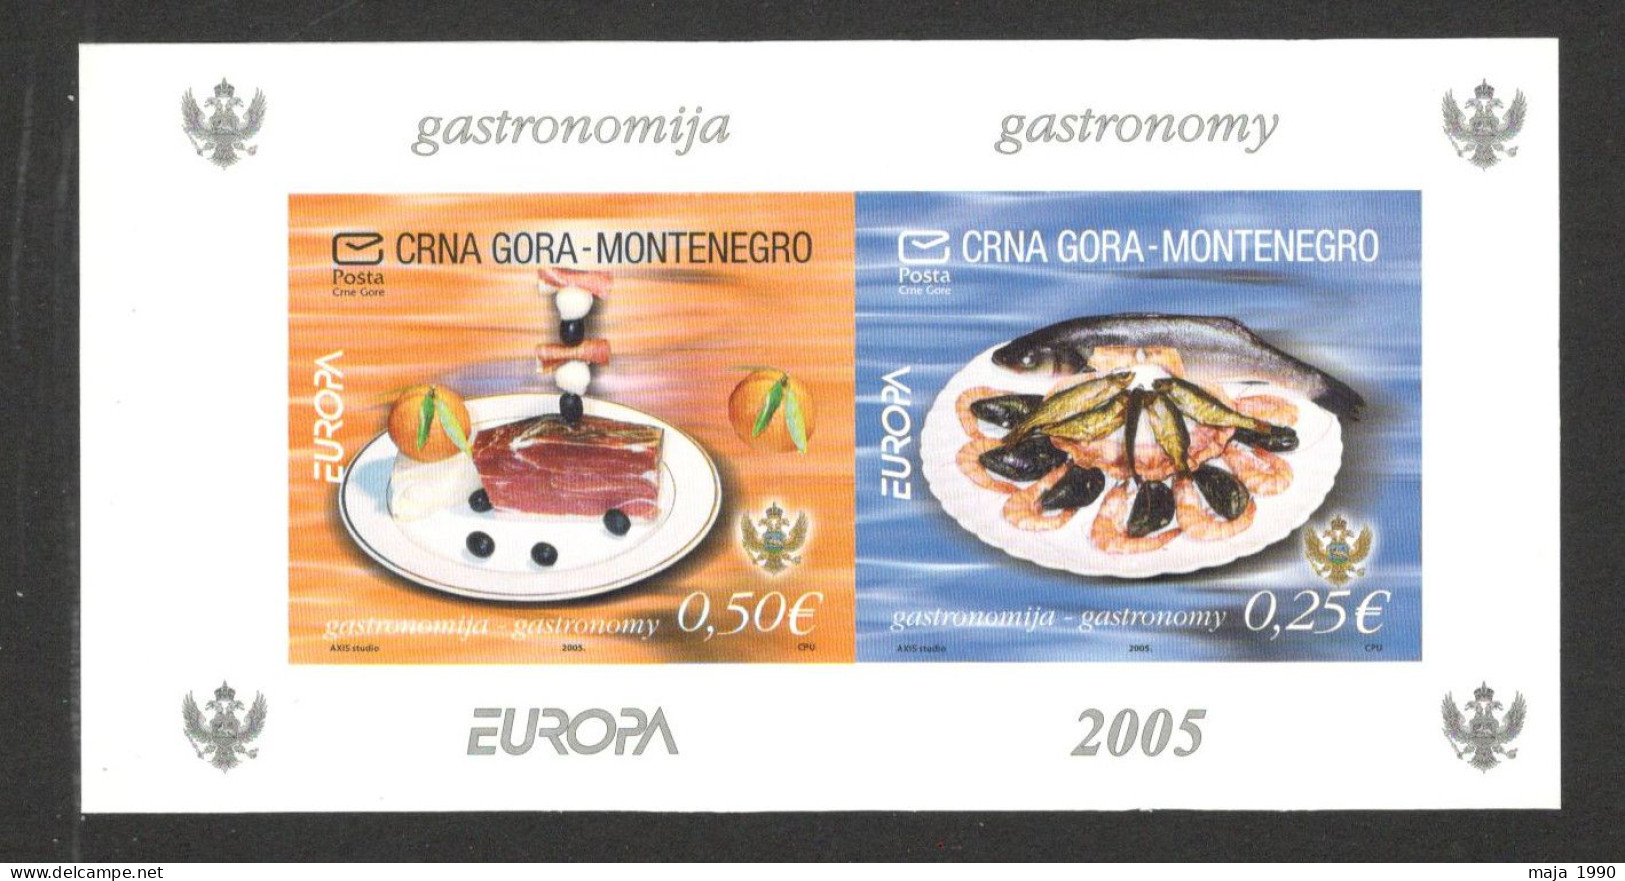 MONTENEGRO - MNH IMPERFORATED BLOCK OUT BOOKLET (NO CARD) - EUROPA CEPT - GASTRONOMY - 2005. - Montenegro